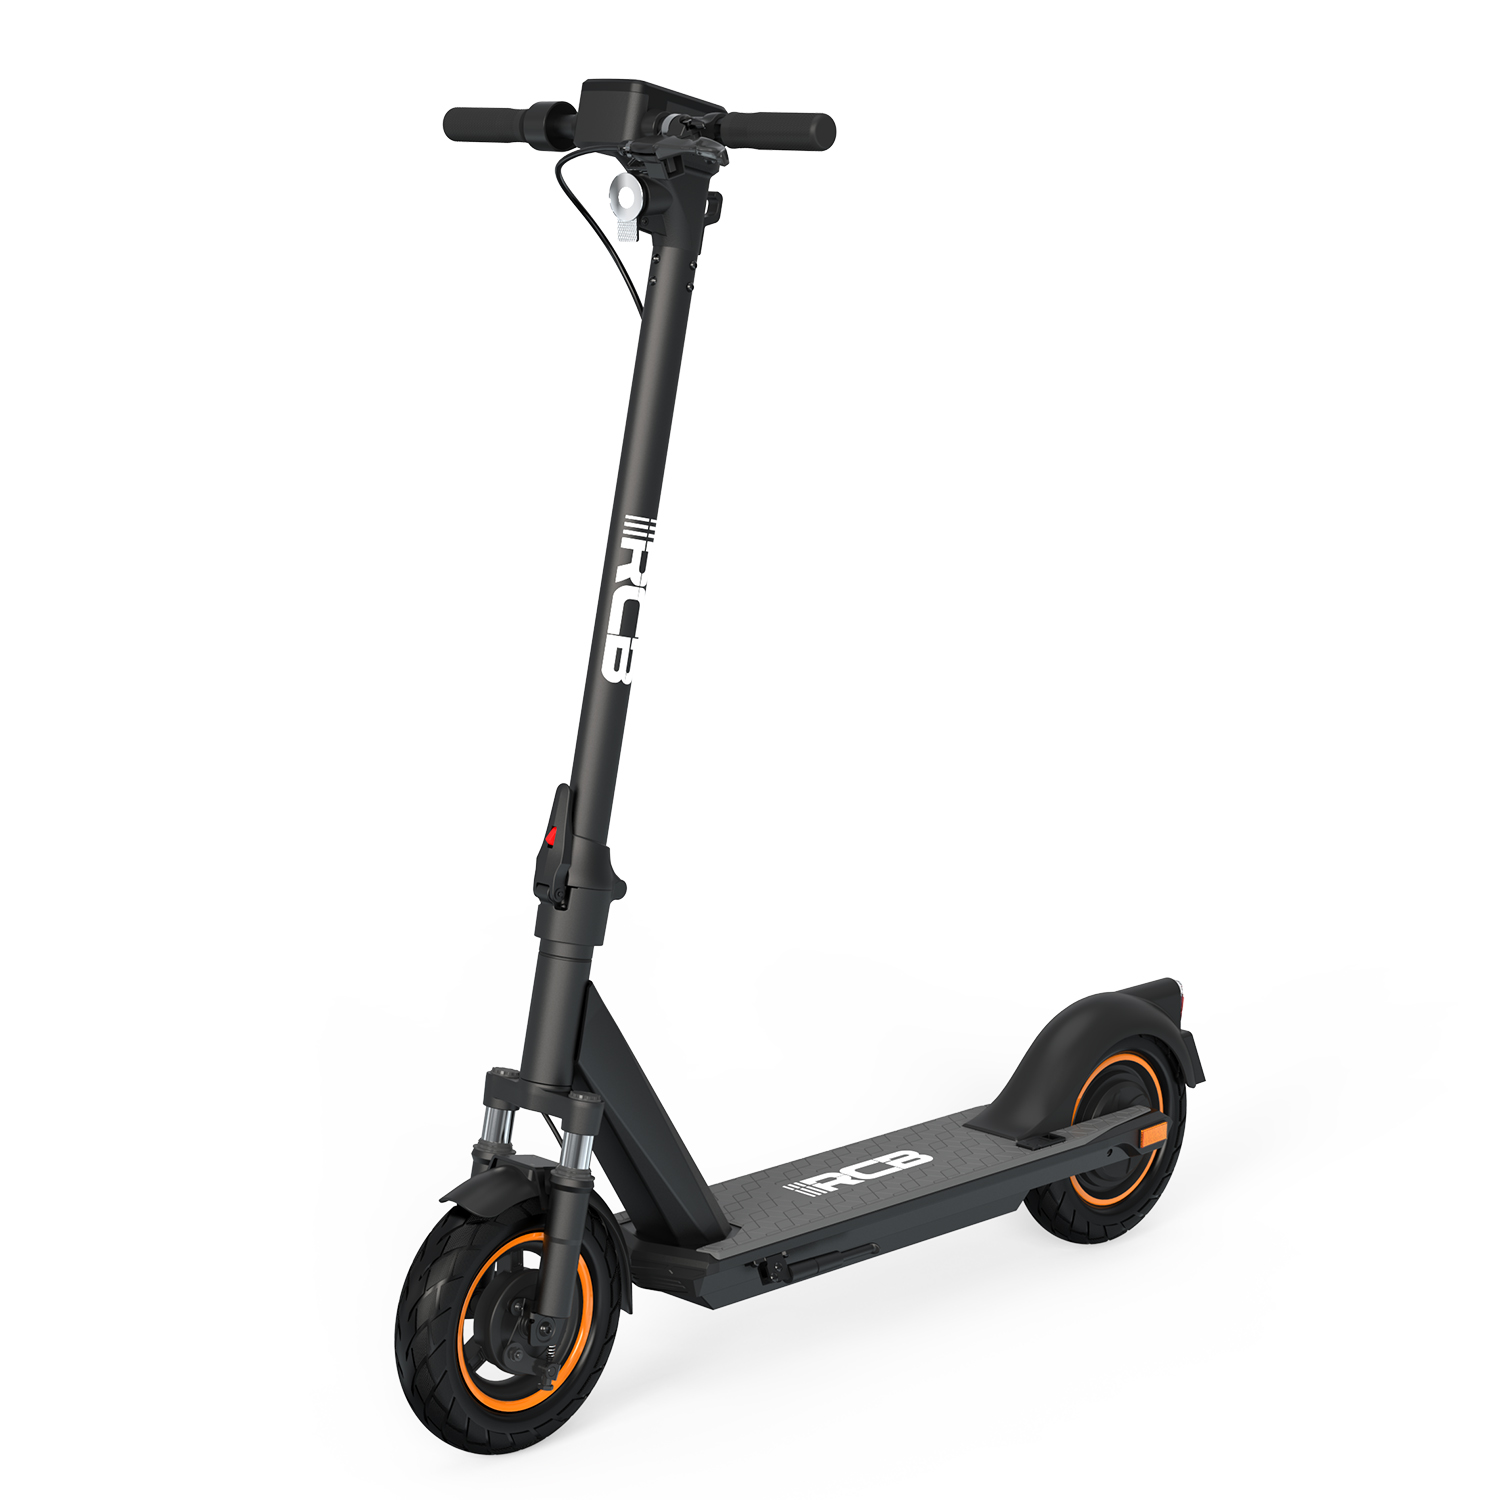 RCB electric scooter gift adults DE (ABE), and teenagers street legal for EV10Z